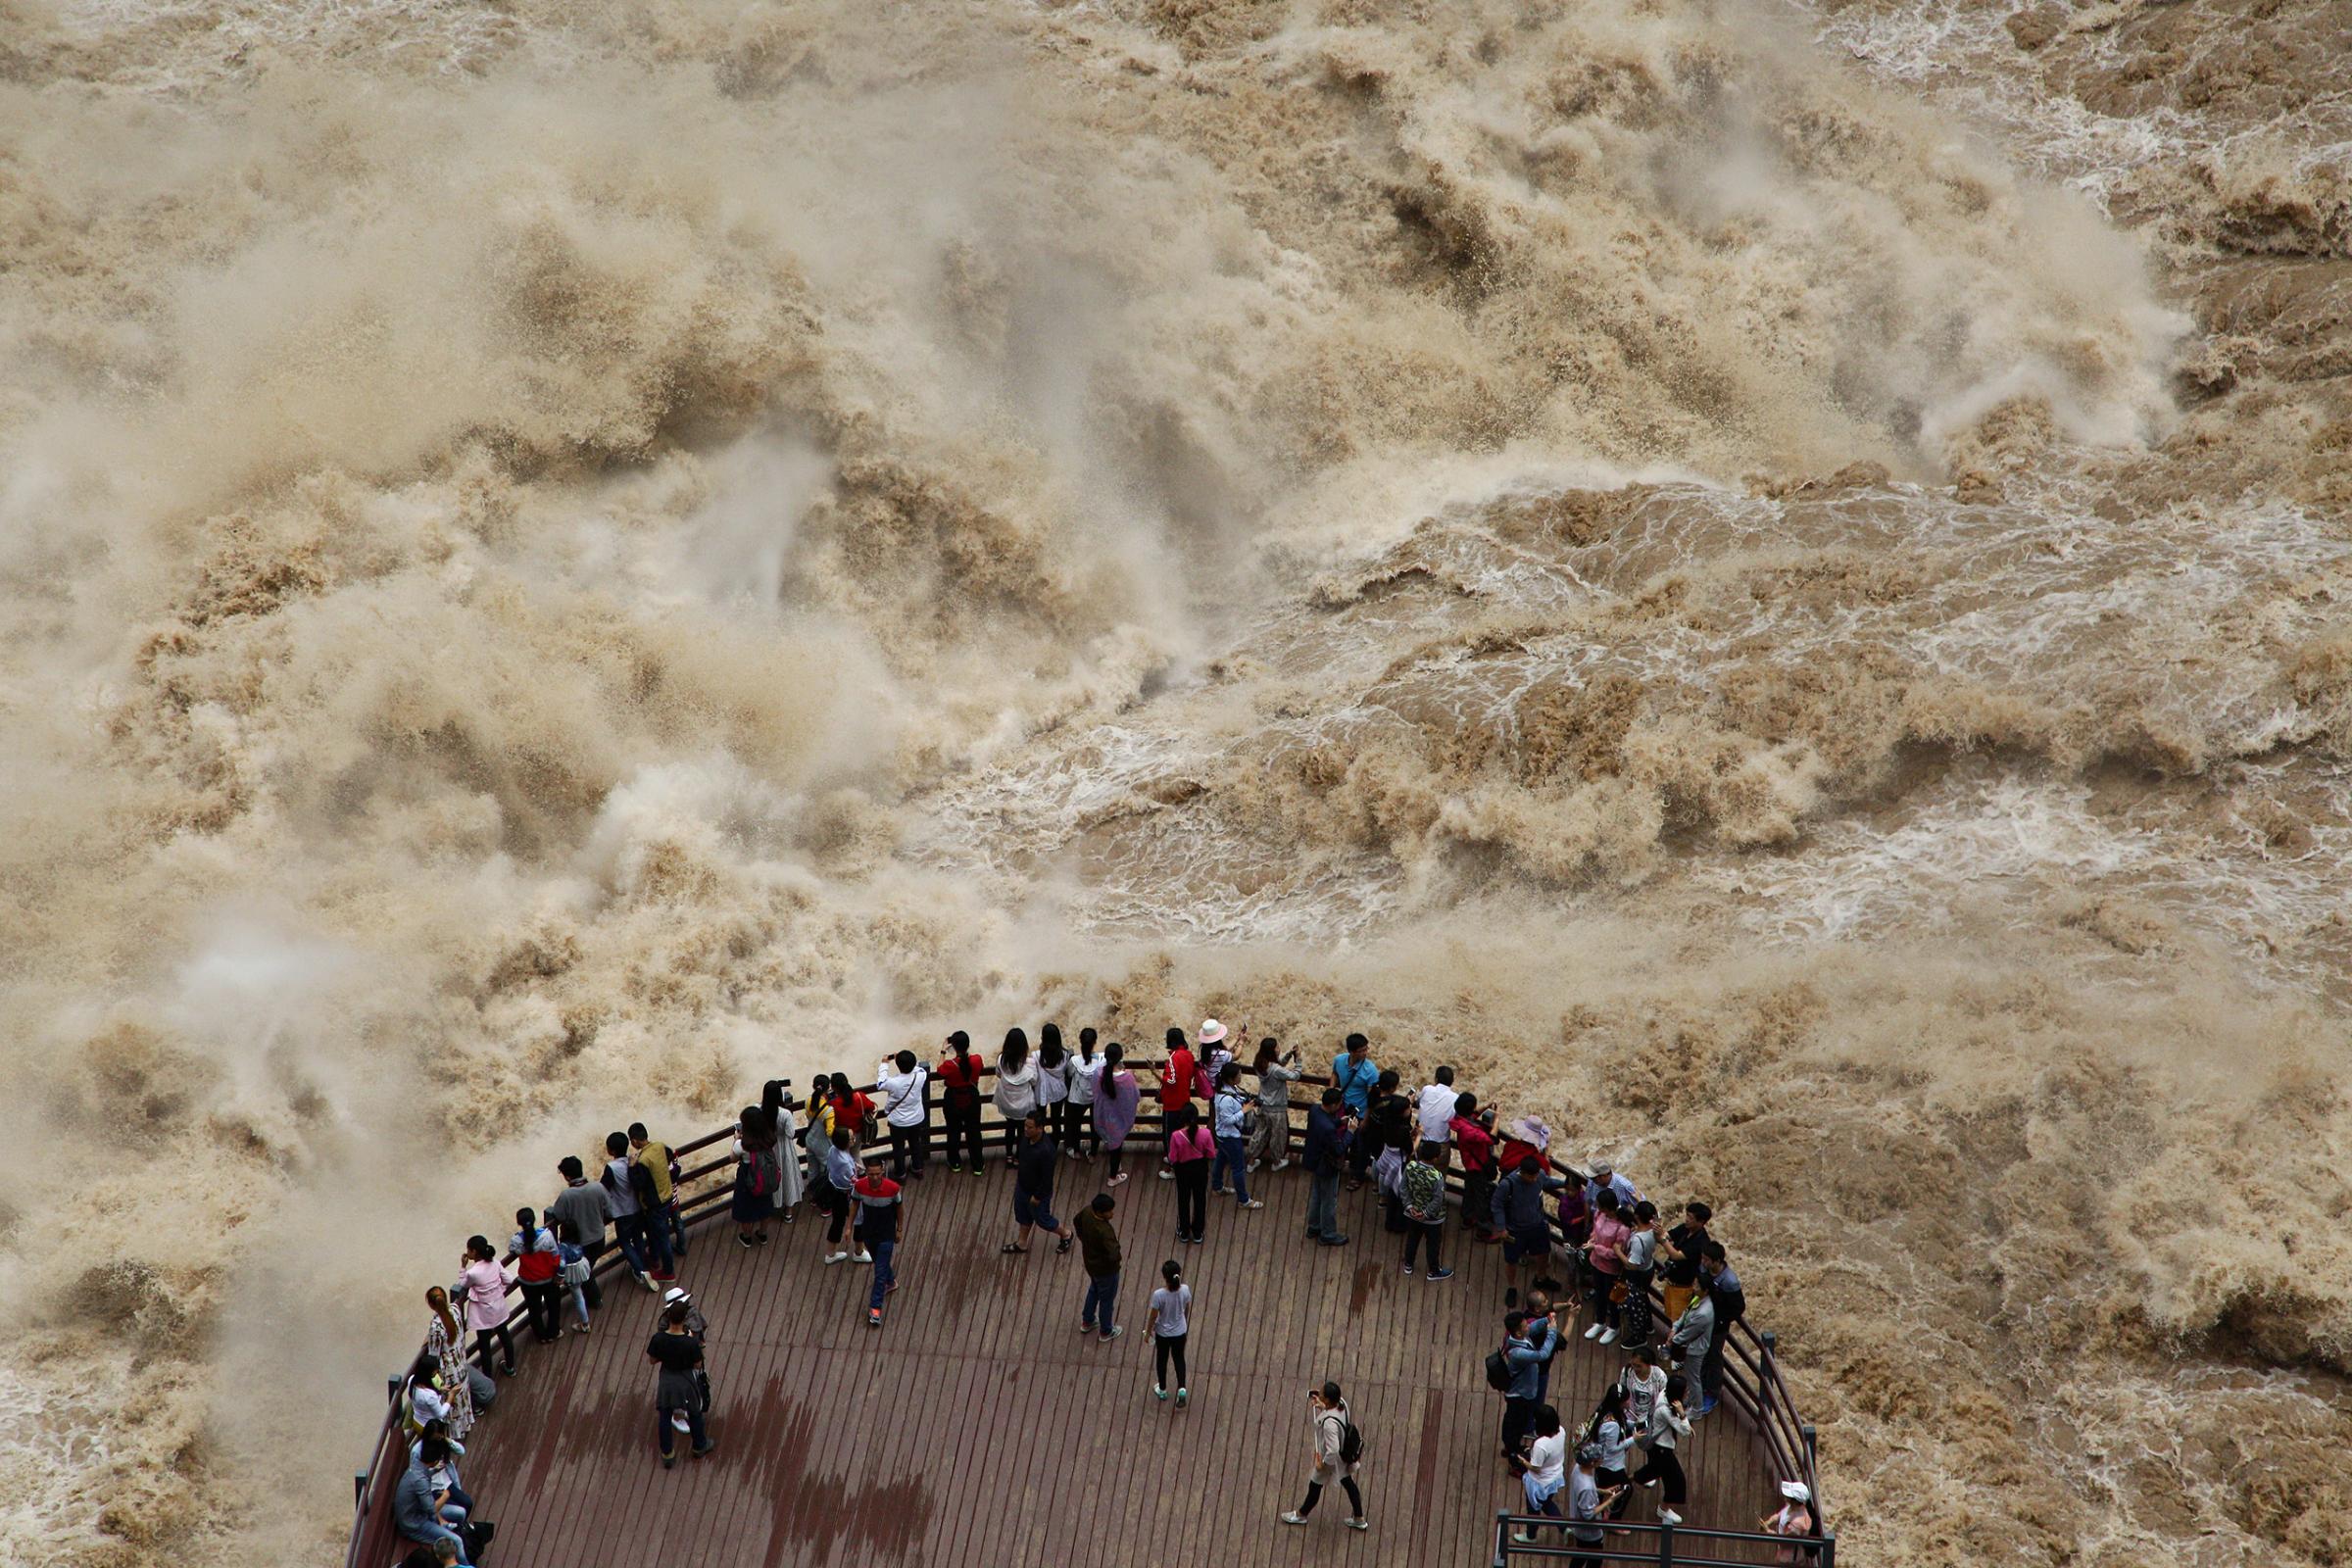 People watch the flooded Jinsha River at a sightseeing platform in Tiger Leaping Gorge, in Diqing, Yunnan Province, China, July 15, 2016.